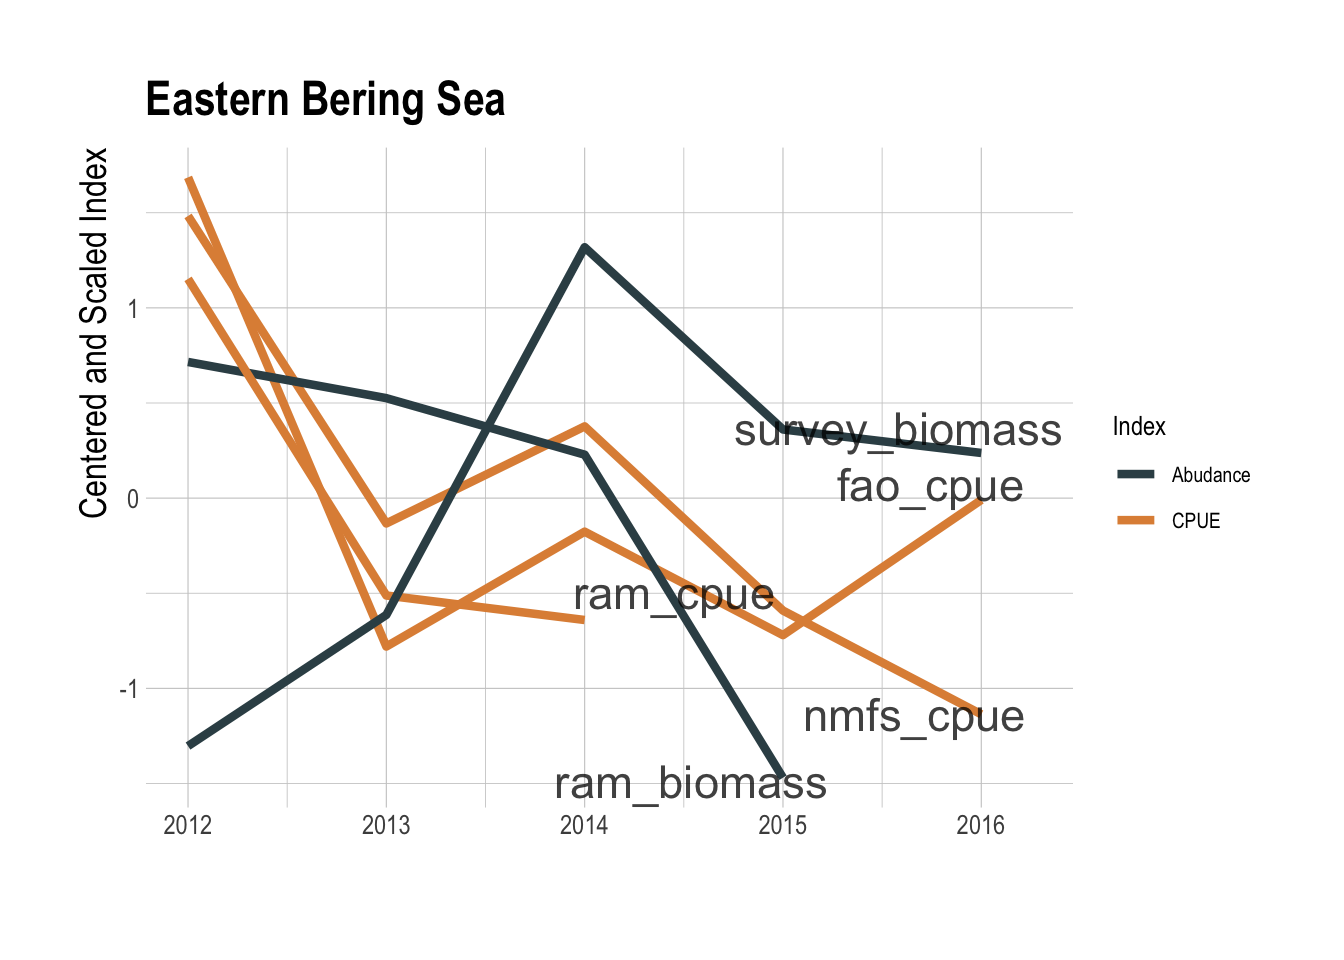 GFW derived CPUE (orange) and abundance indices (blue) for the Eastern Bering Sea region